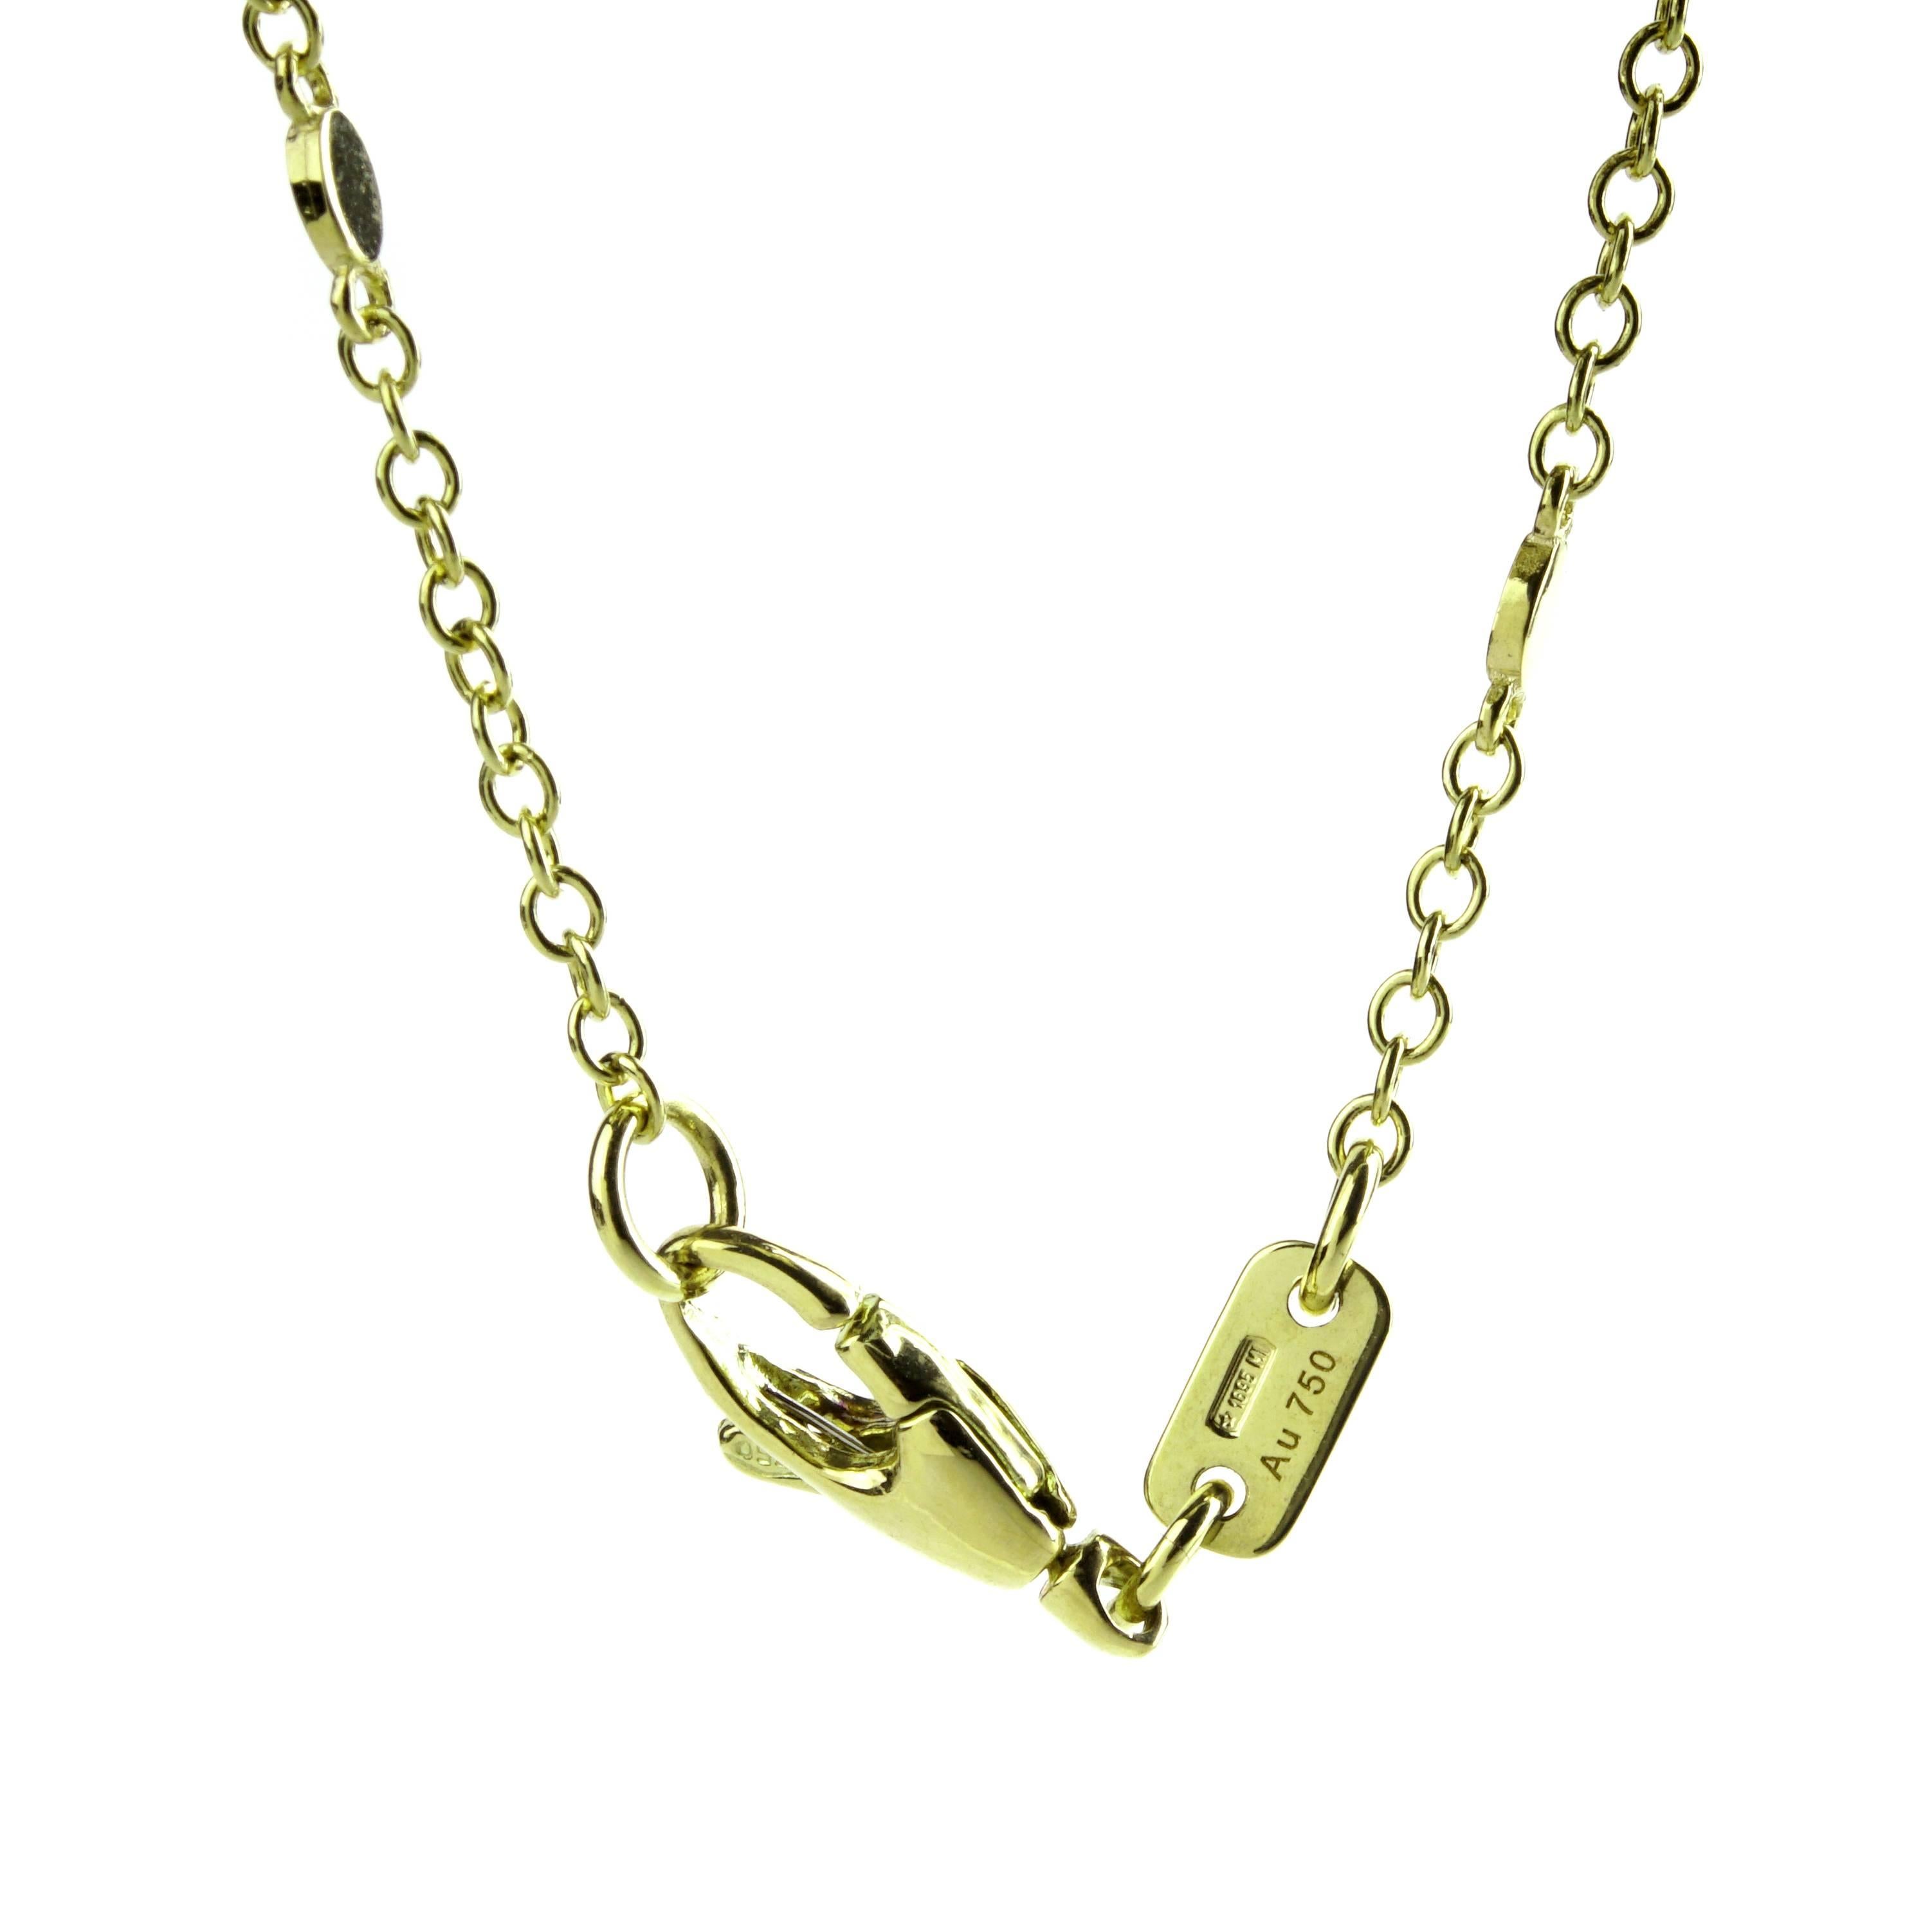 A playful Gucci pendant featuring the Double G motif cut out along side with white enamel flowers and petals in 18k yellow gold. Necklace Length: 16